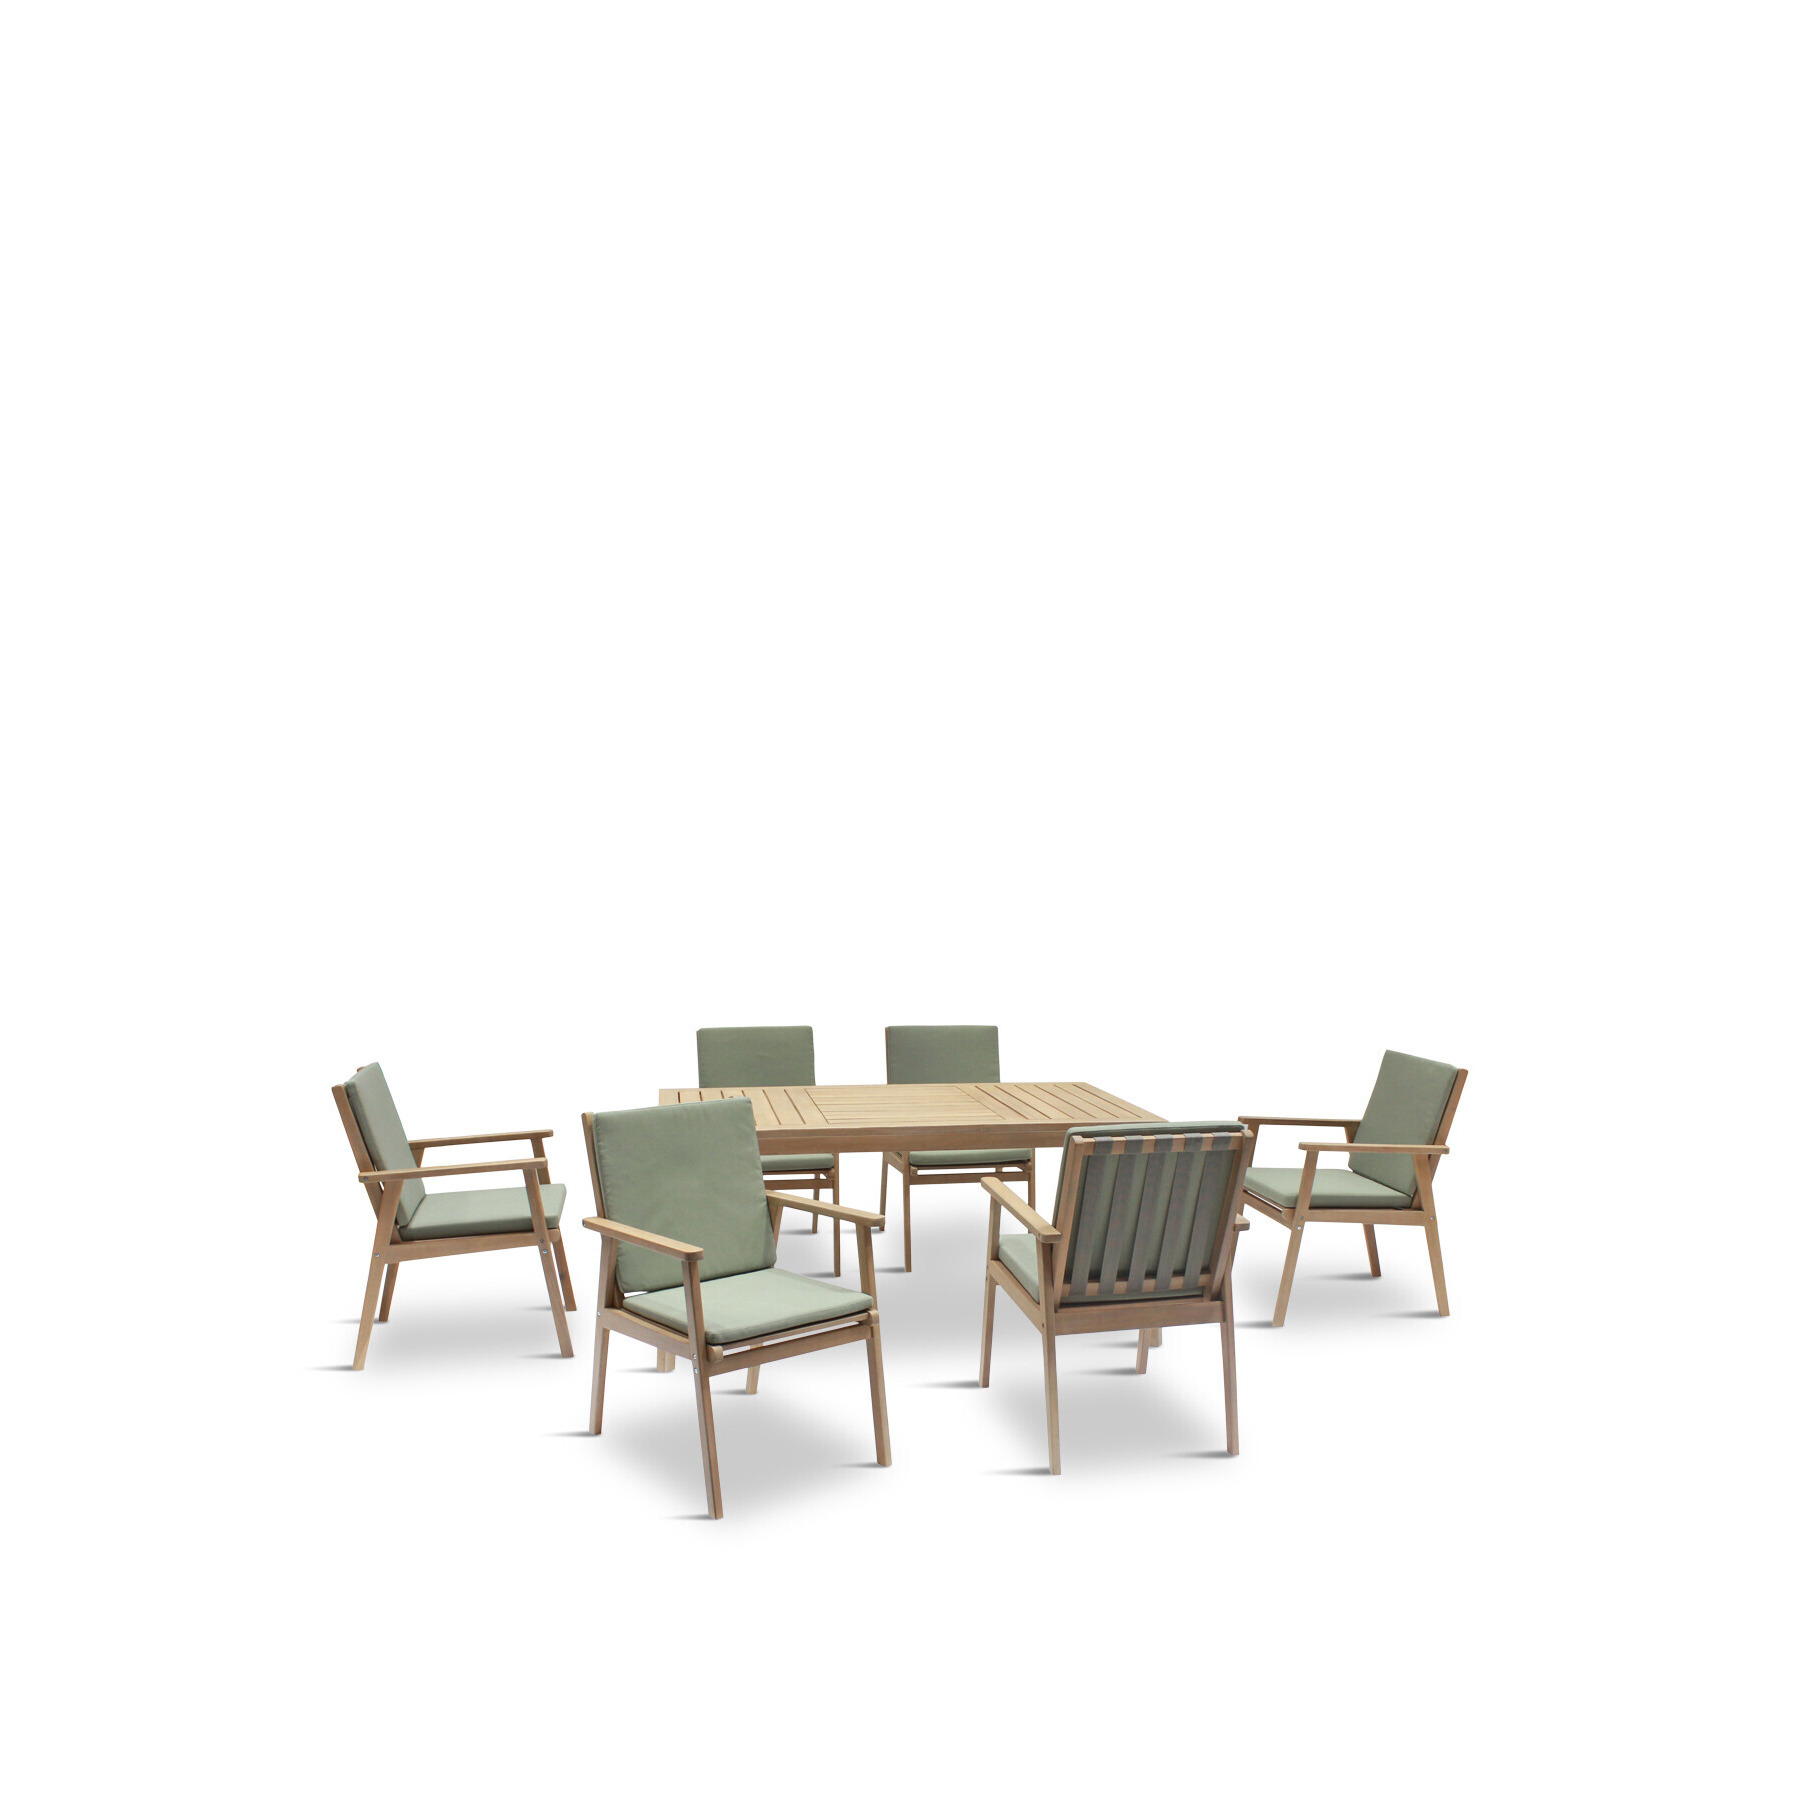 Kettler Hampton 6 Seat Dining Set with Dining Table and 6 Chairs Natural - image 1